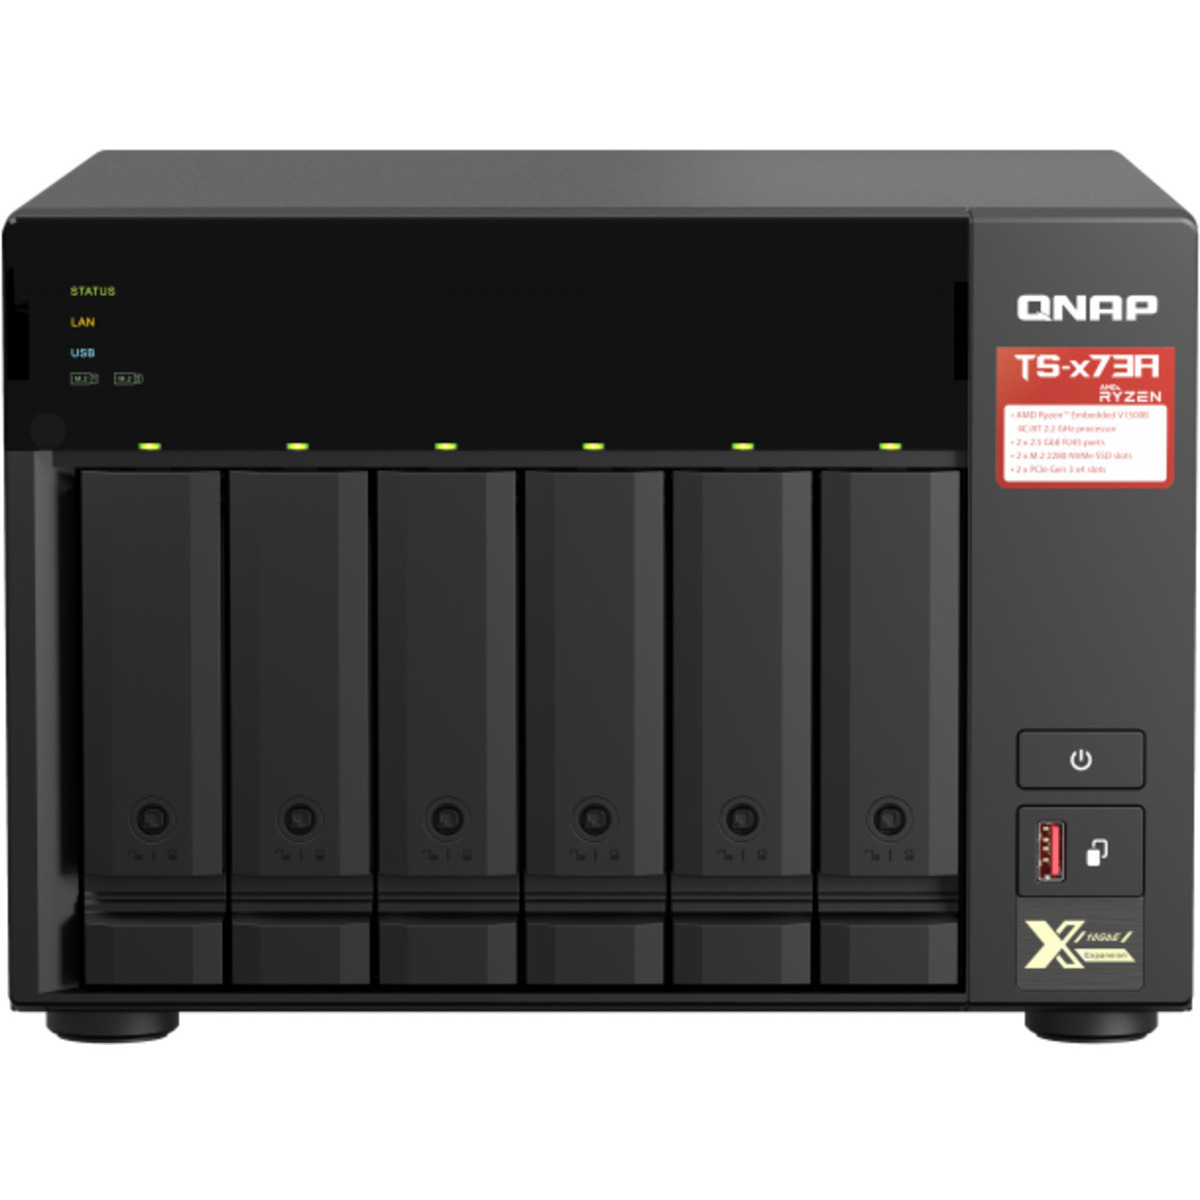 buy QNAP TS-673A Desktop NAS - Network Attached Storage Device Burn-In Tested Configurations - nas headquarters buy network attached storage server device das new raid-5 free shipping usa christmas new year holiday sale TS-673A